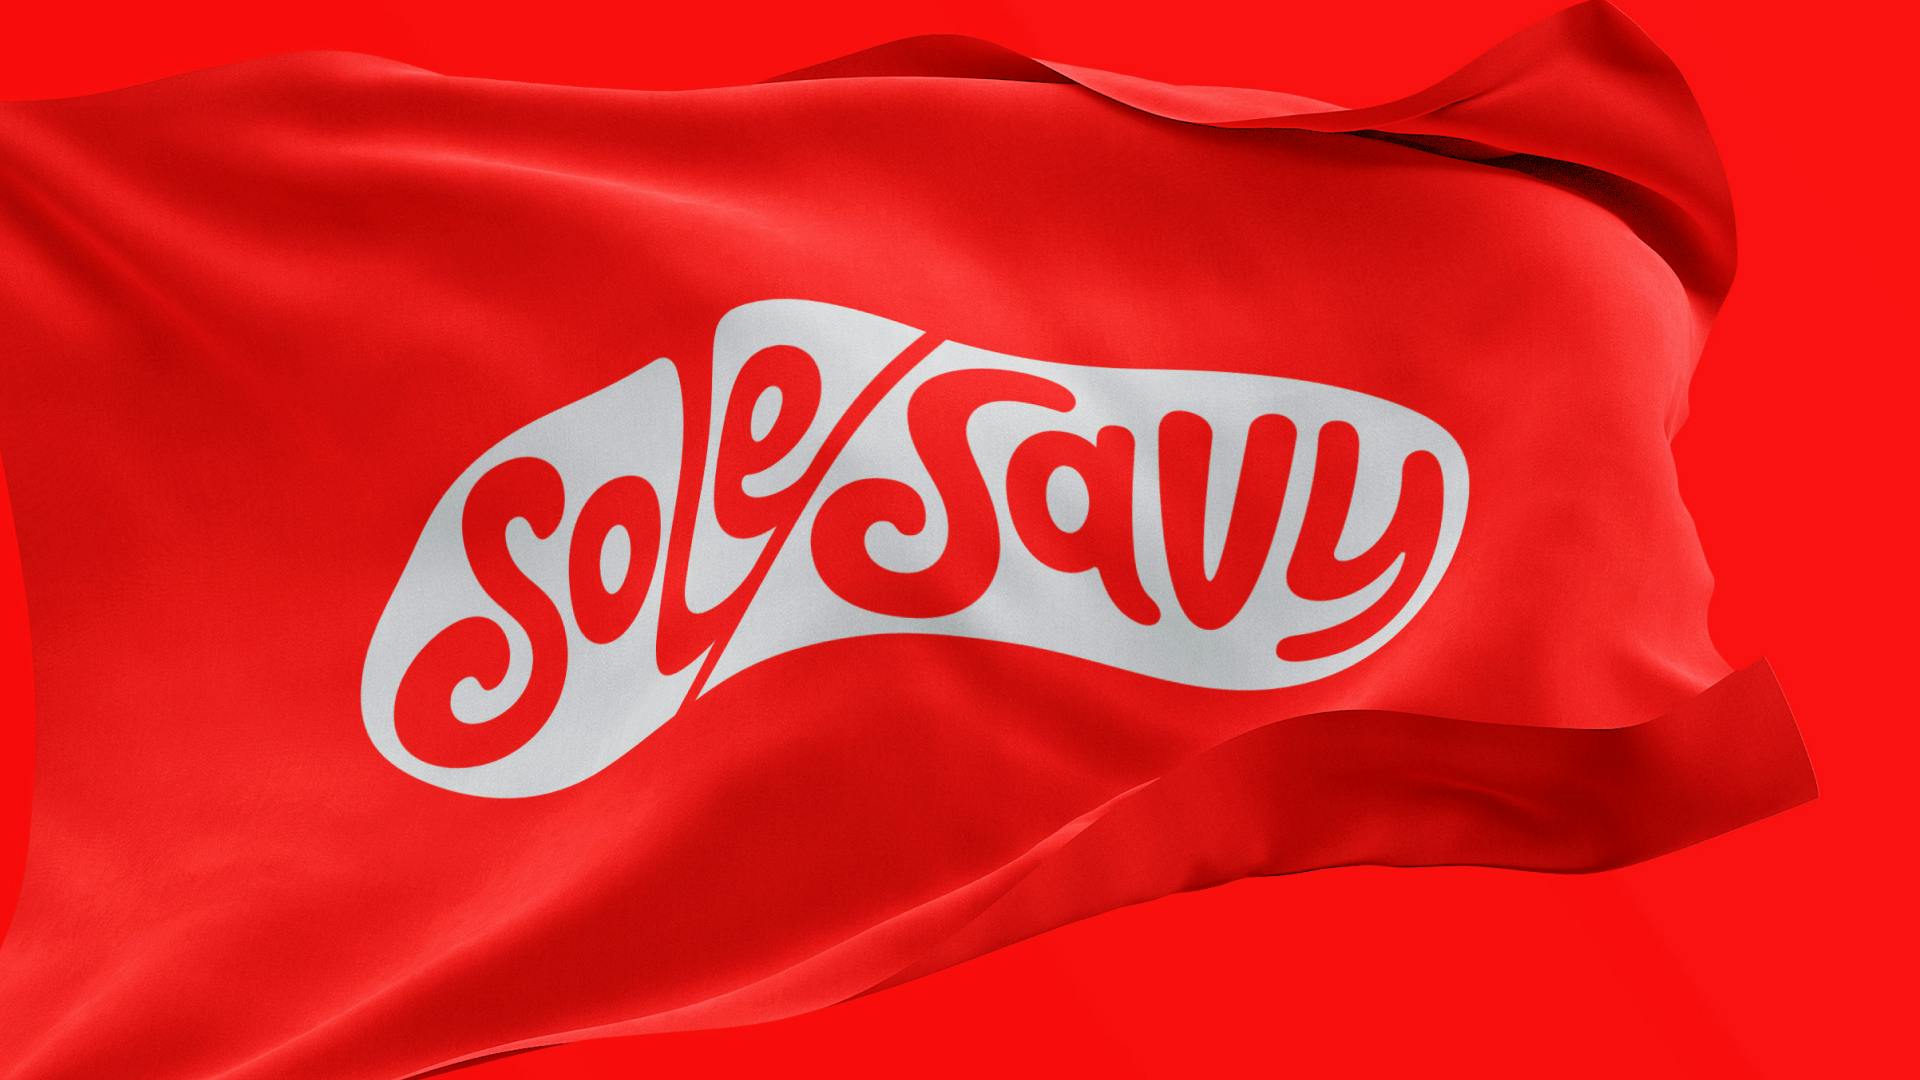 SoleSavy — A vibrant brand bringing sneaker culture to the people.